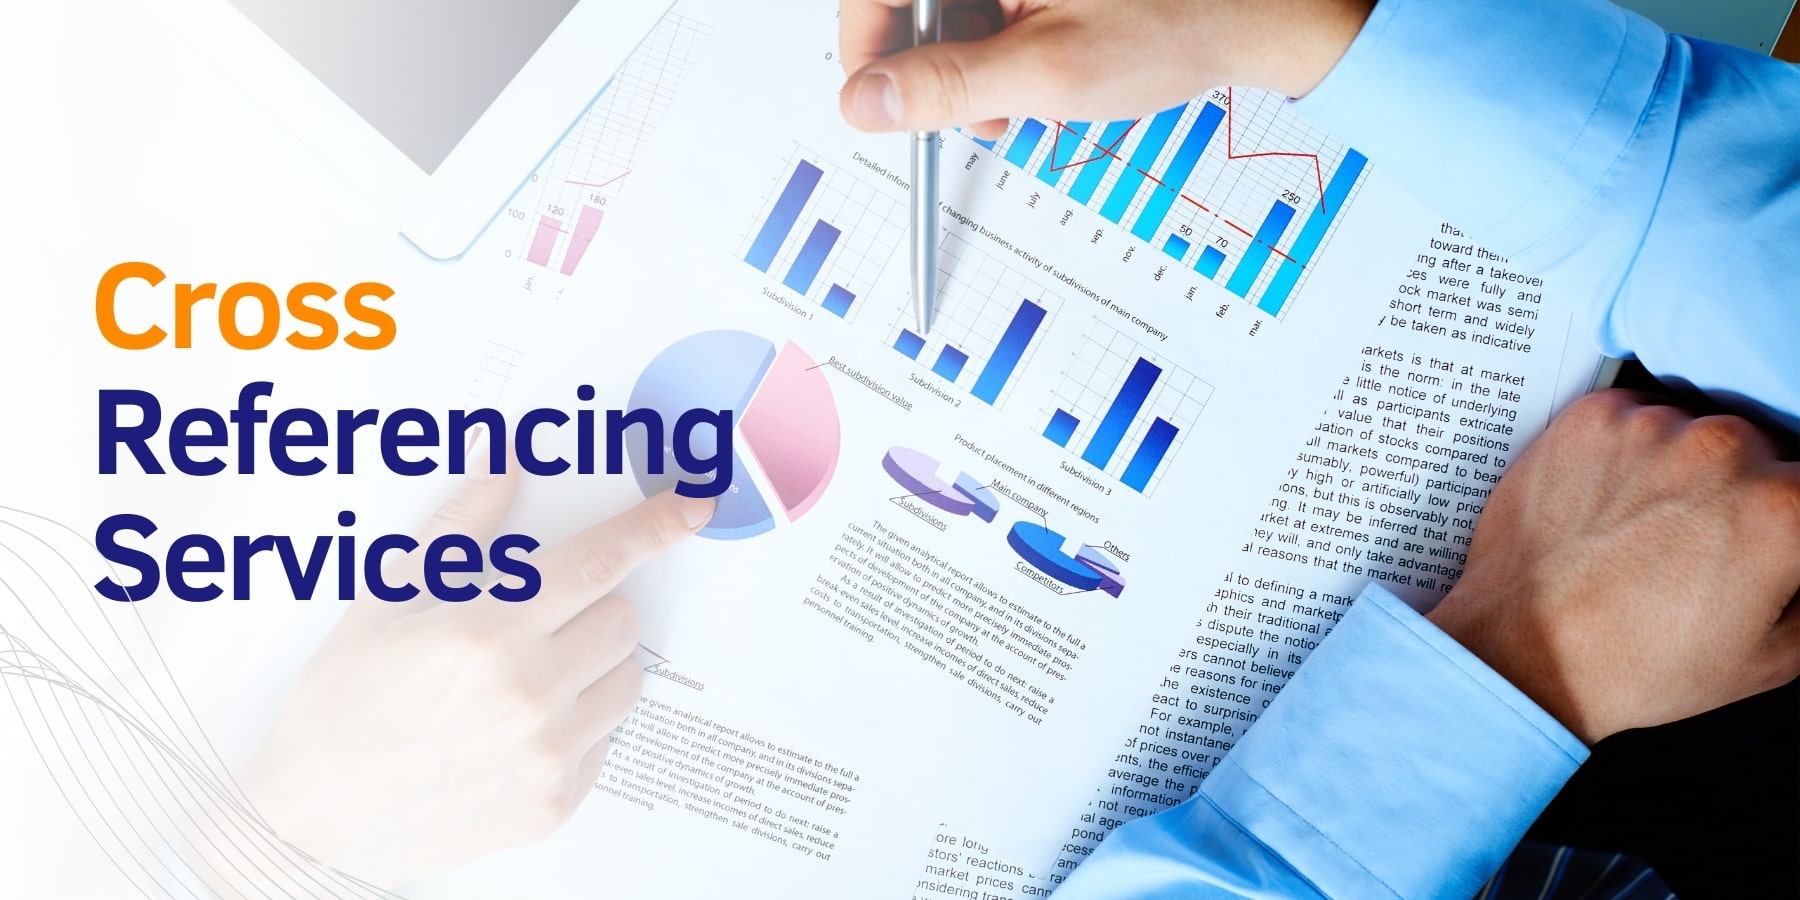 Cross Referencing Services